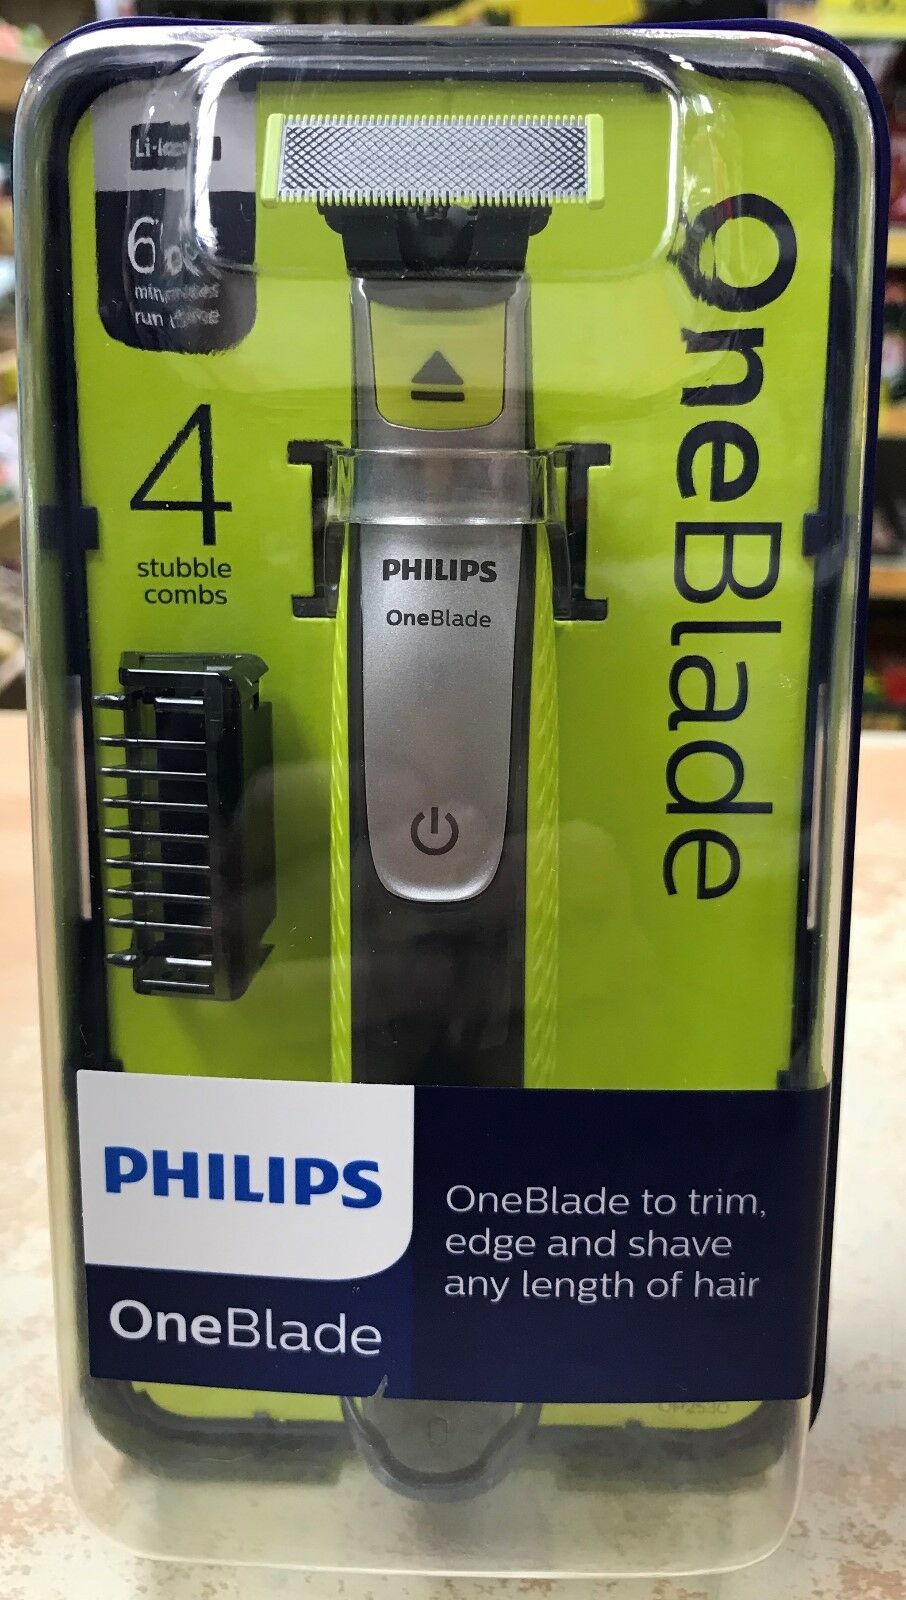 Philips Oneblade with 3 Stubble Combs, Mens